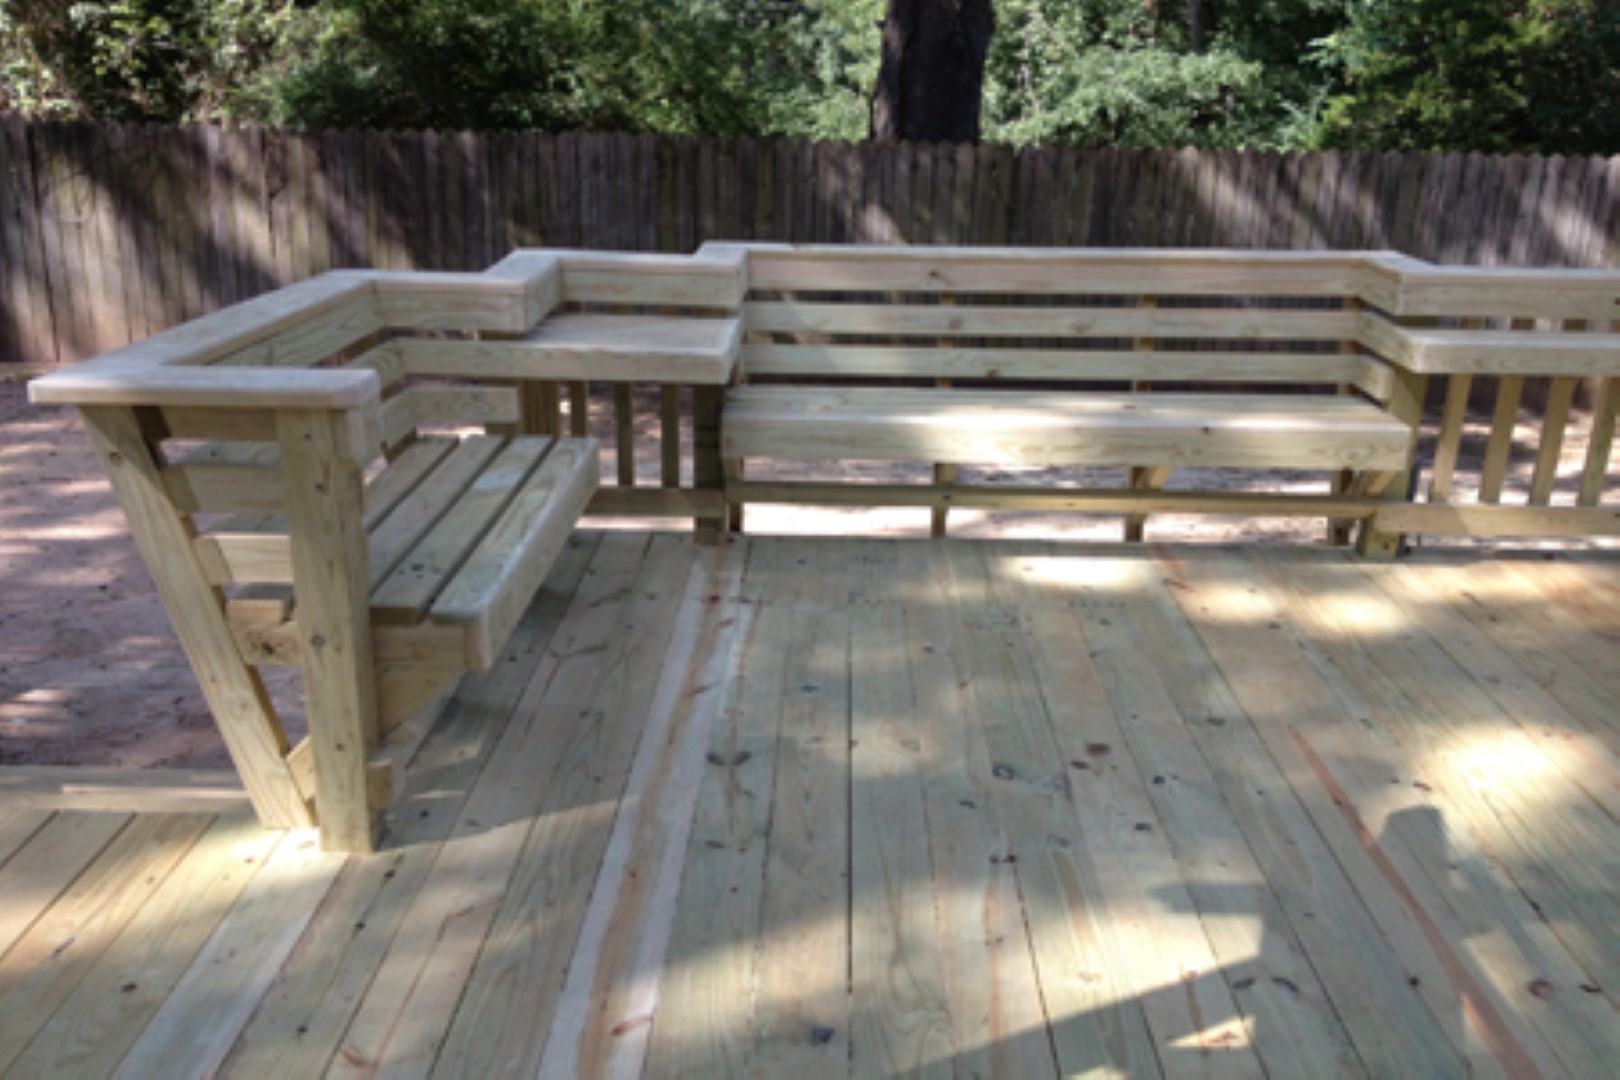 Our Trademarked Bench Set